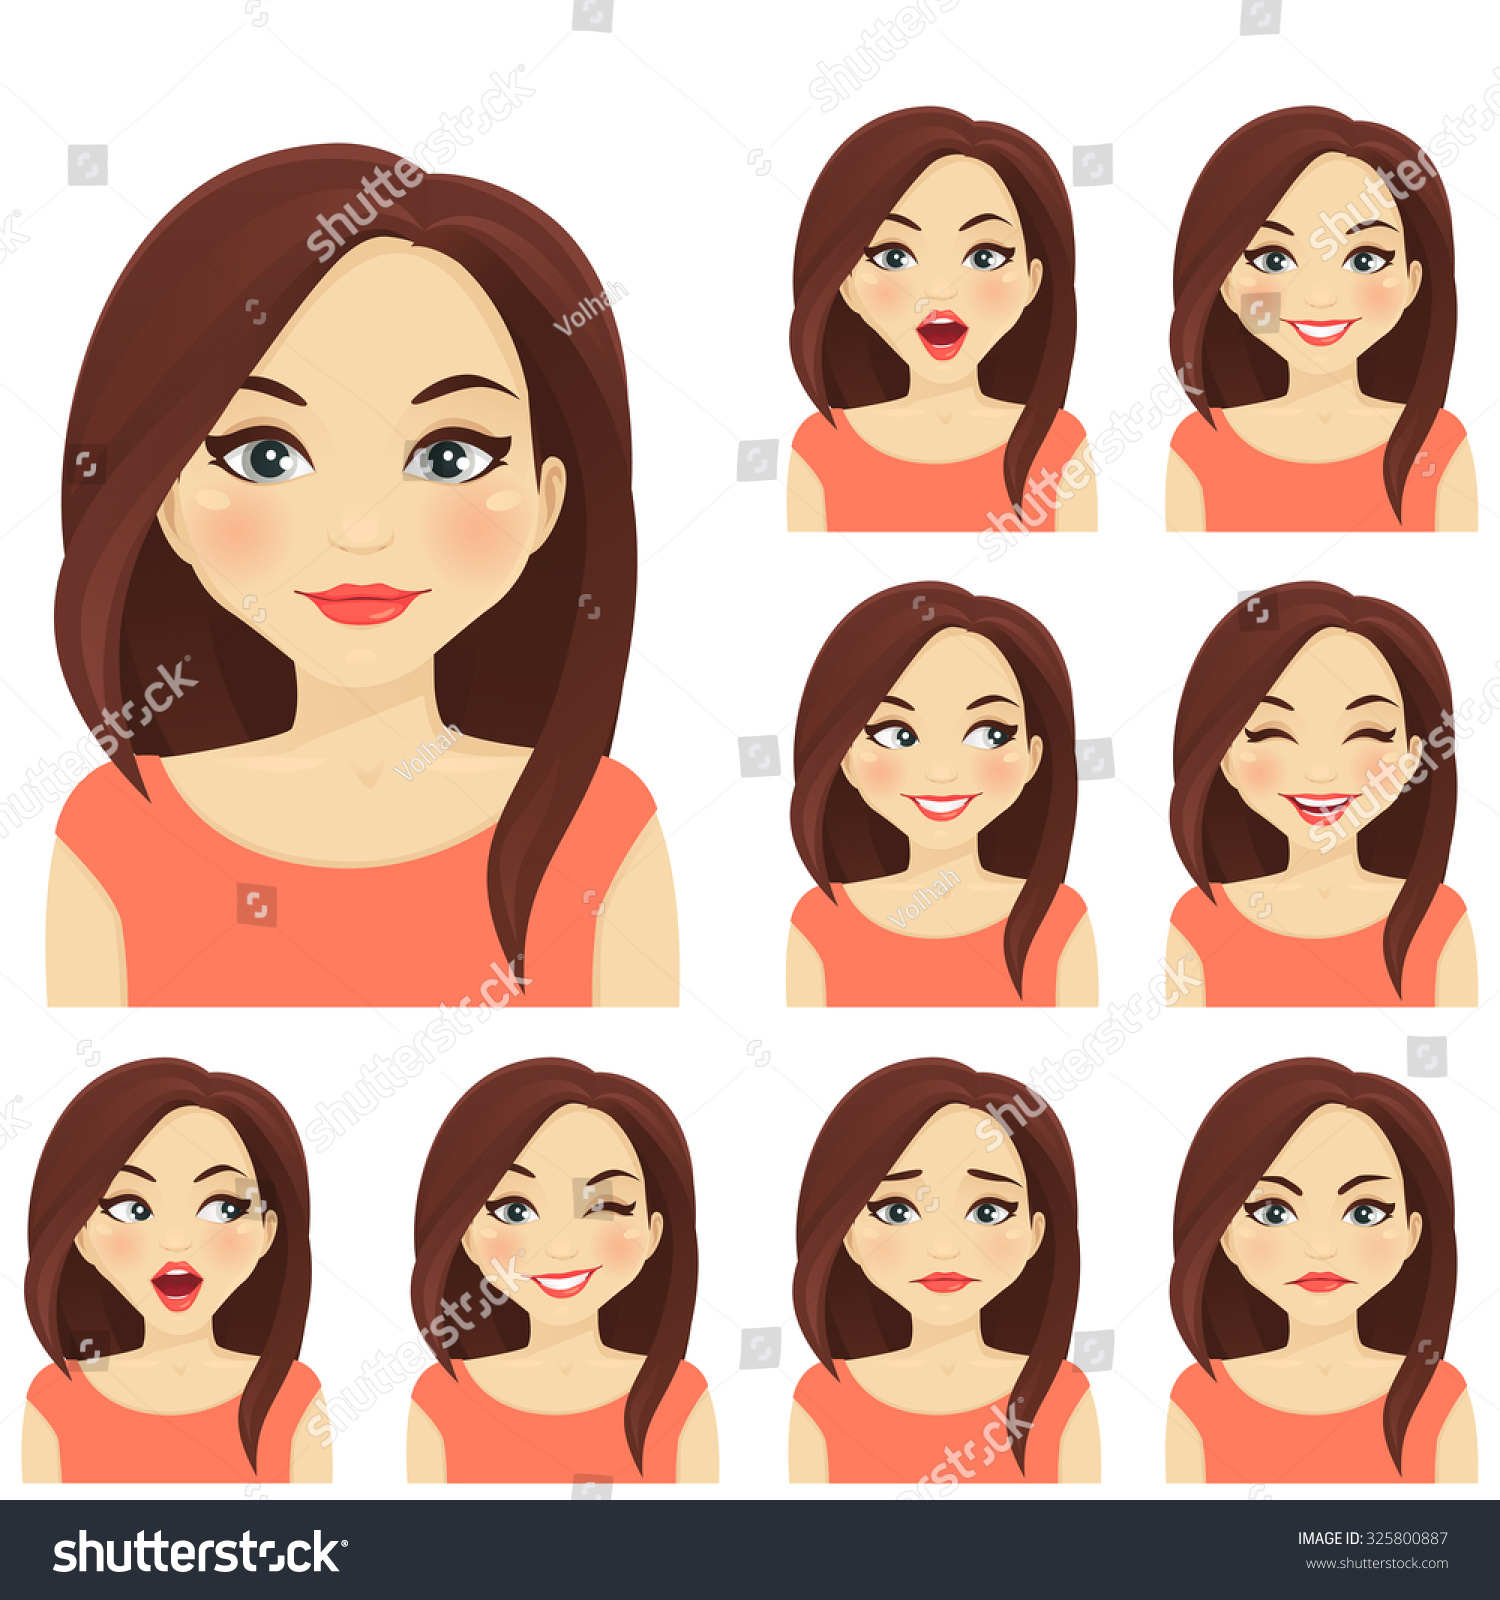 Woman With Different Facial Expressions Vector Illust